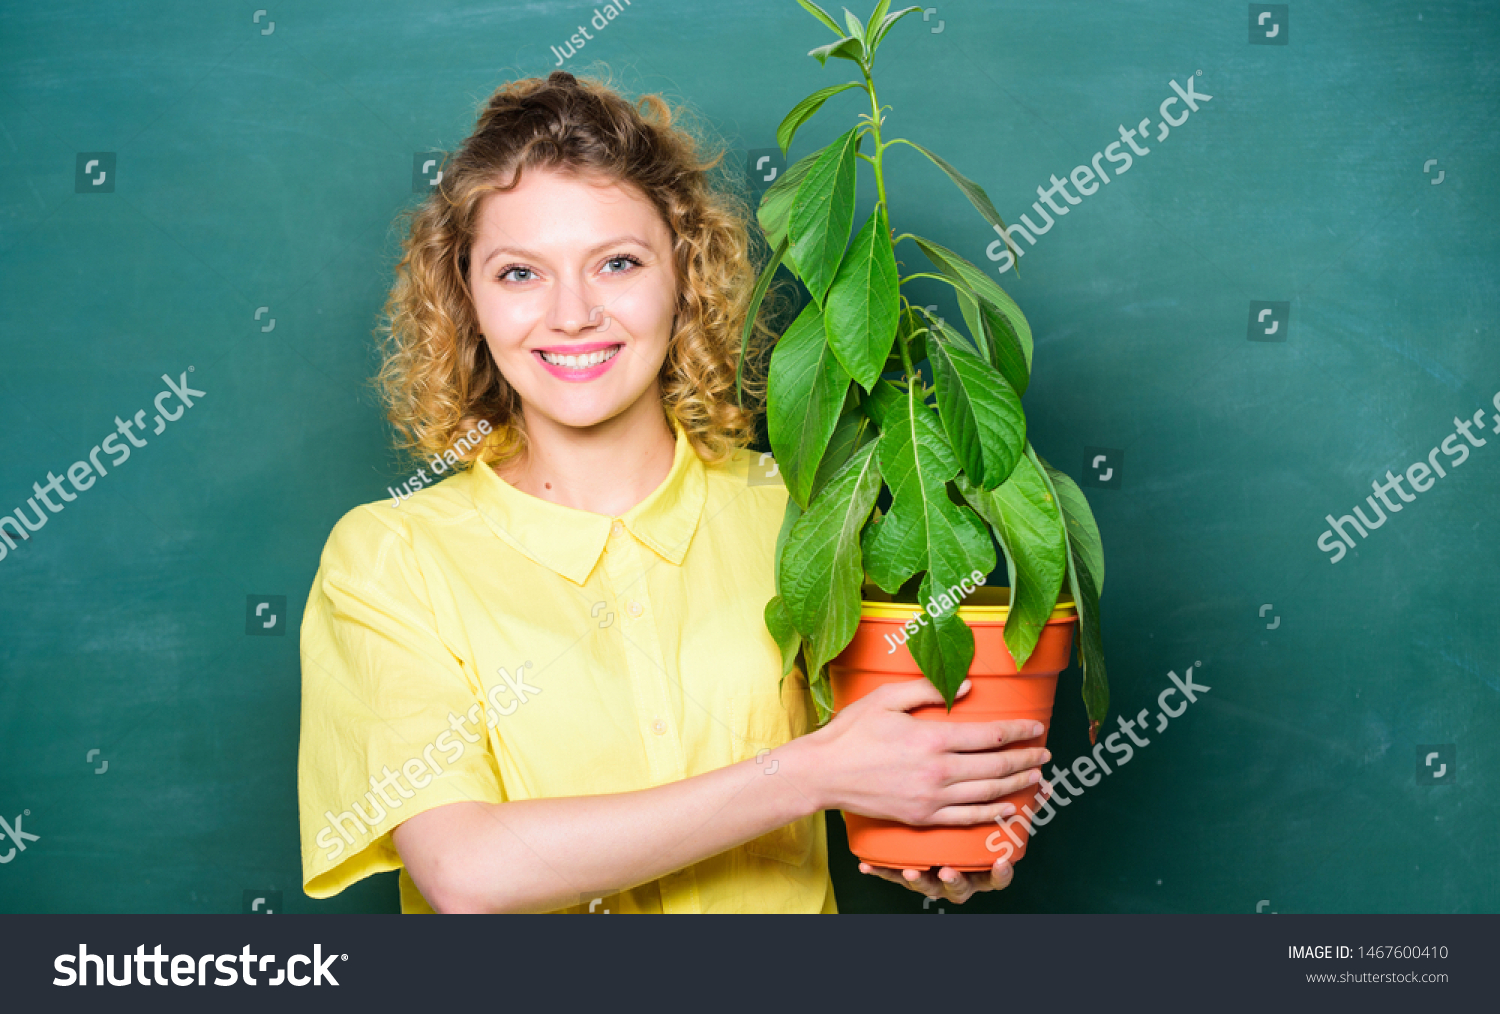 Botany is about plants flowers and herbs. Woman chalkboard background carry plant in pot. Take good care plants. Botany and biology lesson. Botanical expert. Botany education. Florist concept. #1467600410